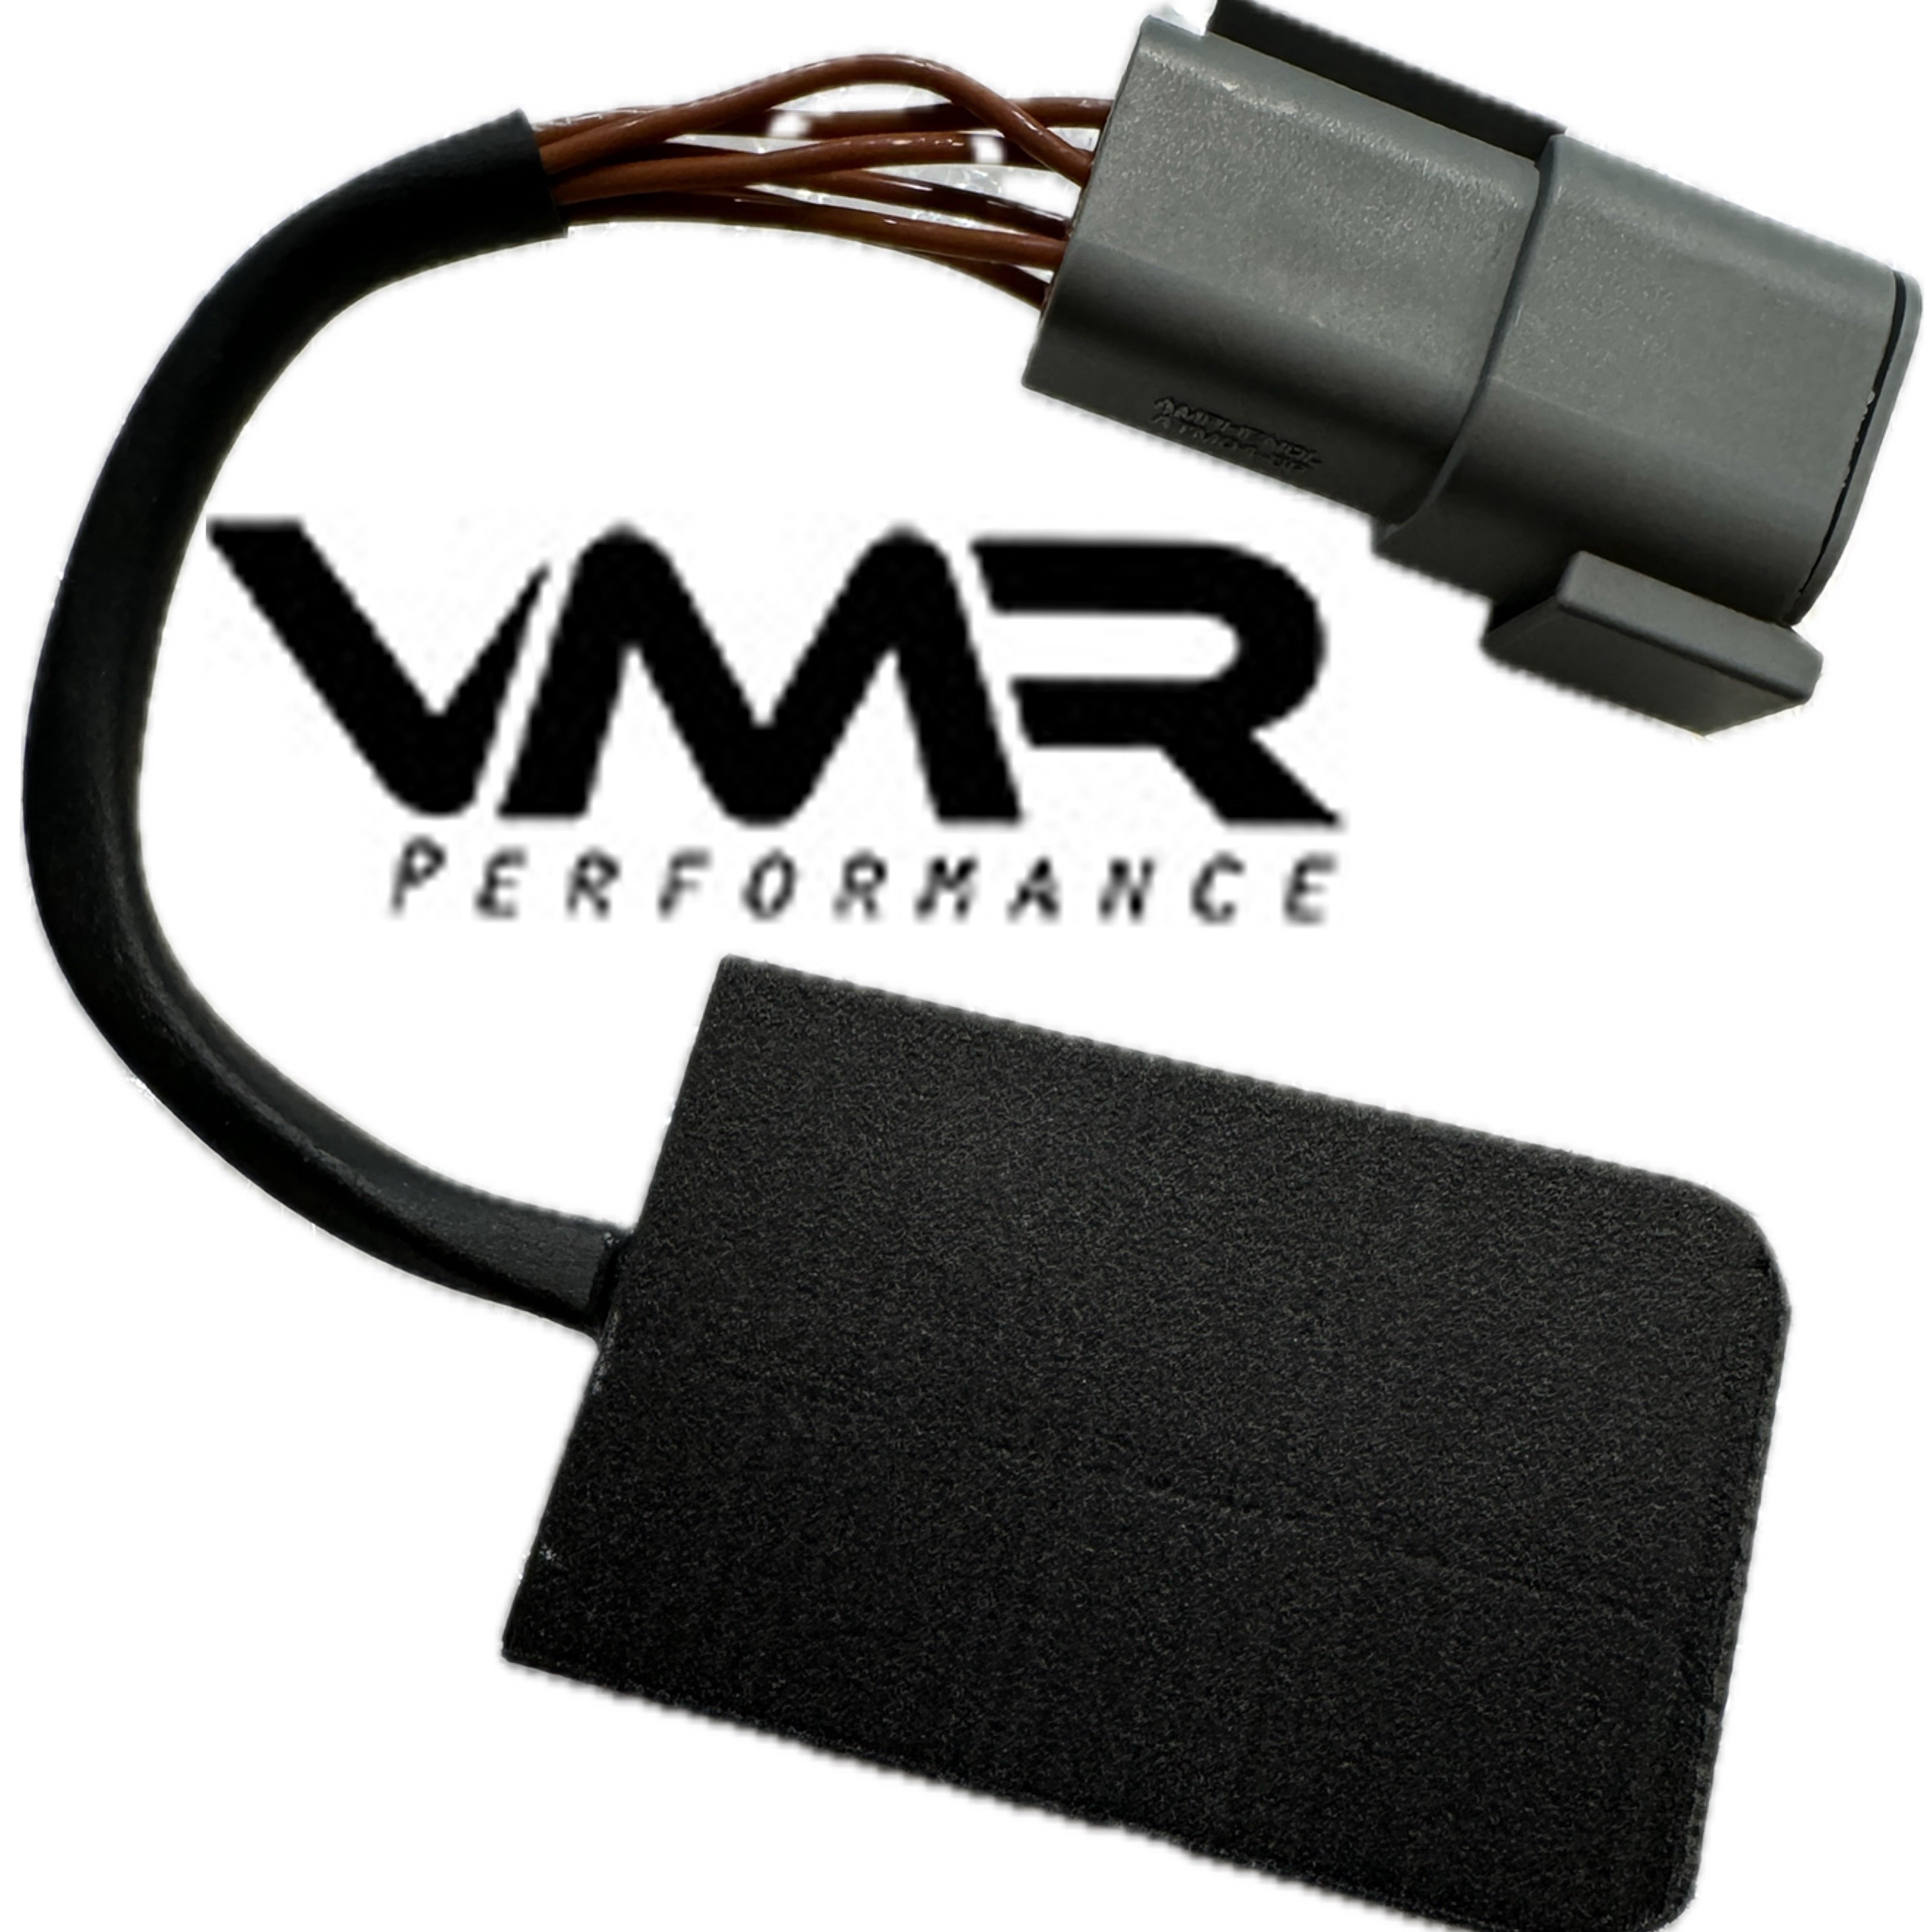 Introducing the VMR Protocol Converter